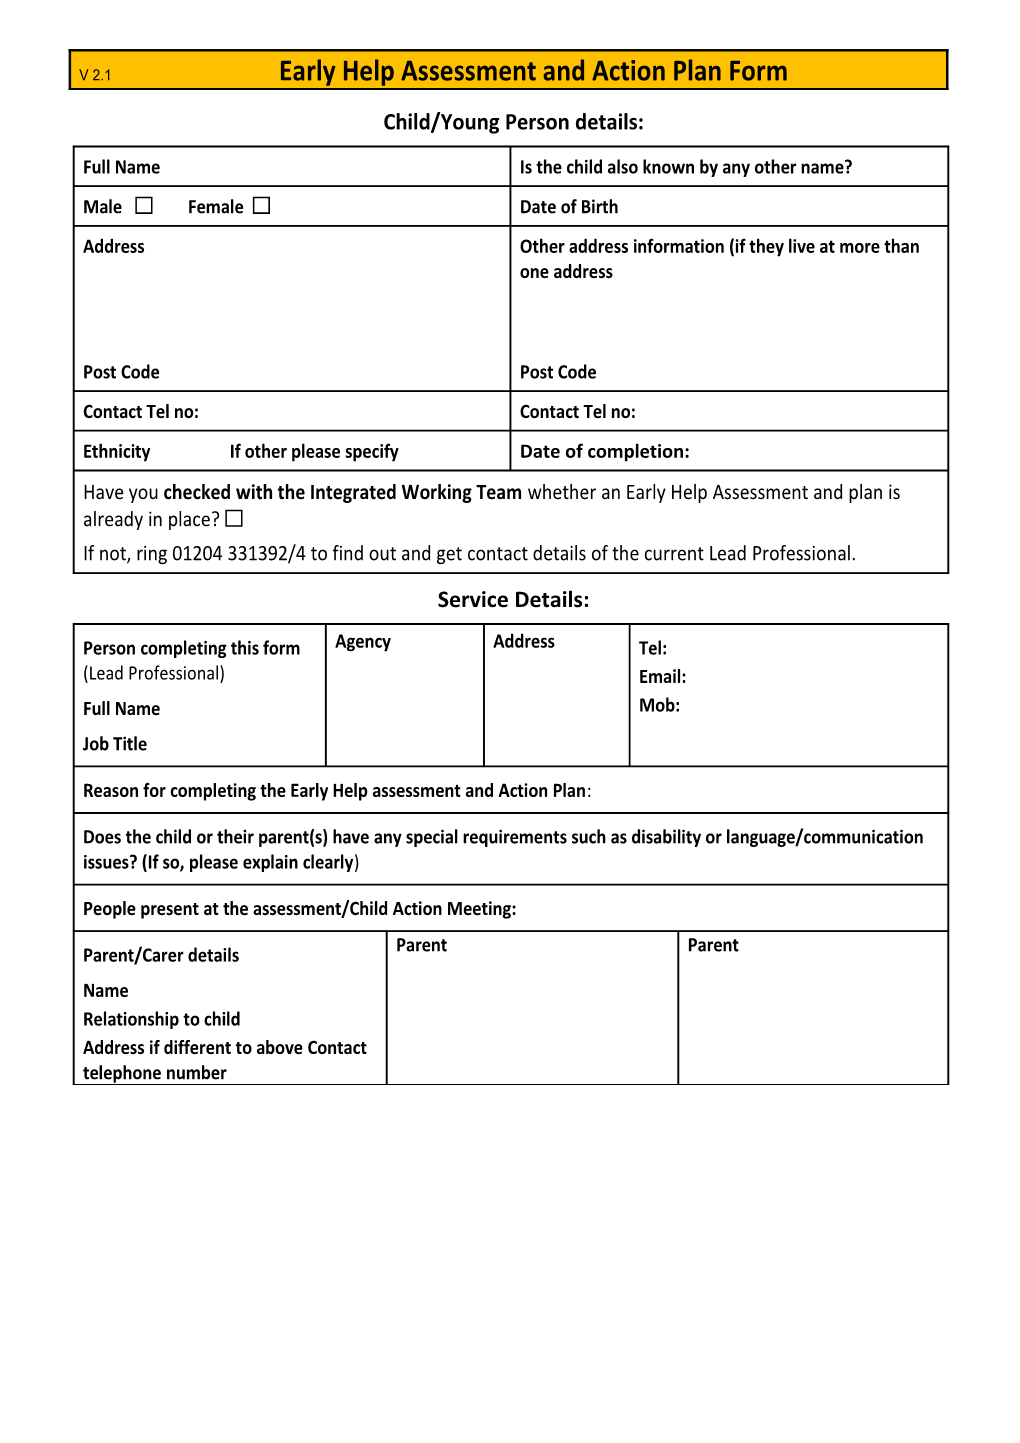 The Purpose of This Assessment Is to Gather Information About the Child Or Young Person